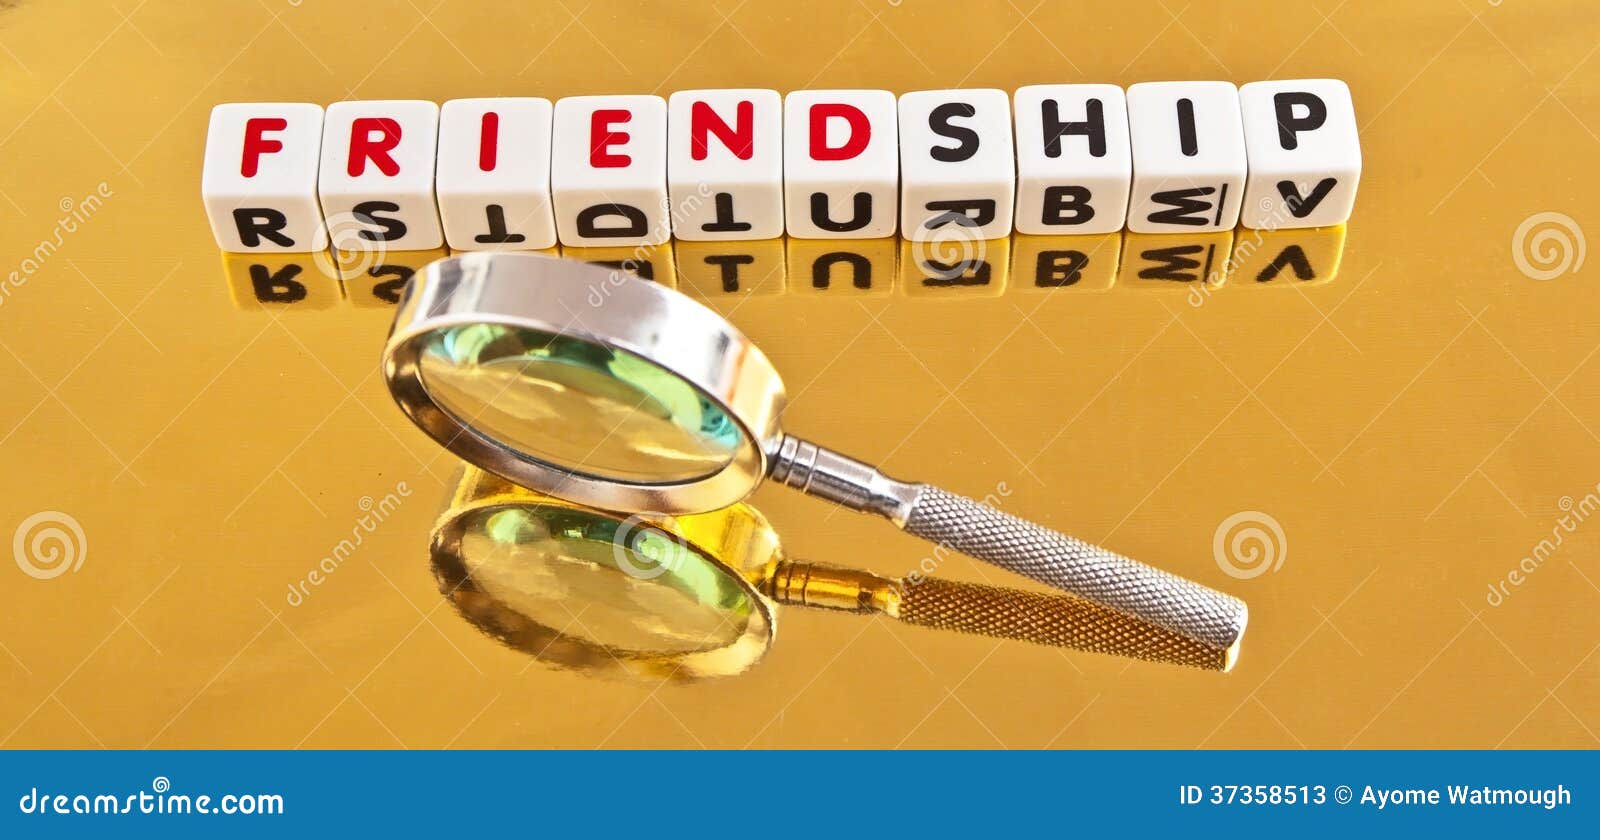 search for friendship